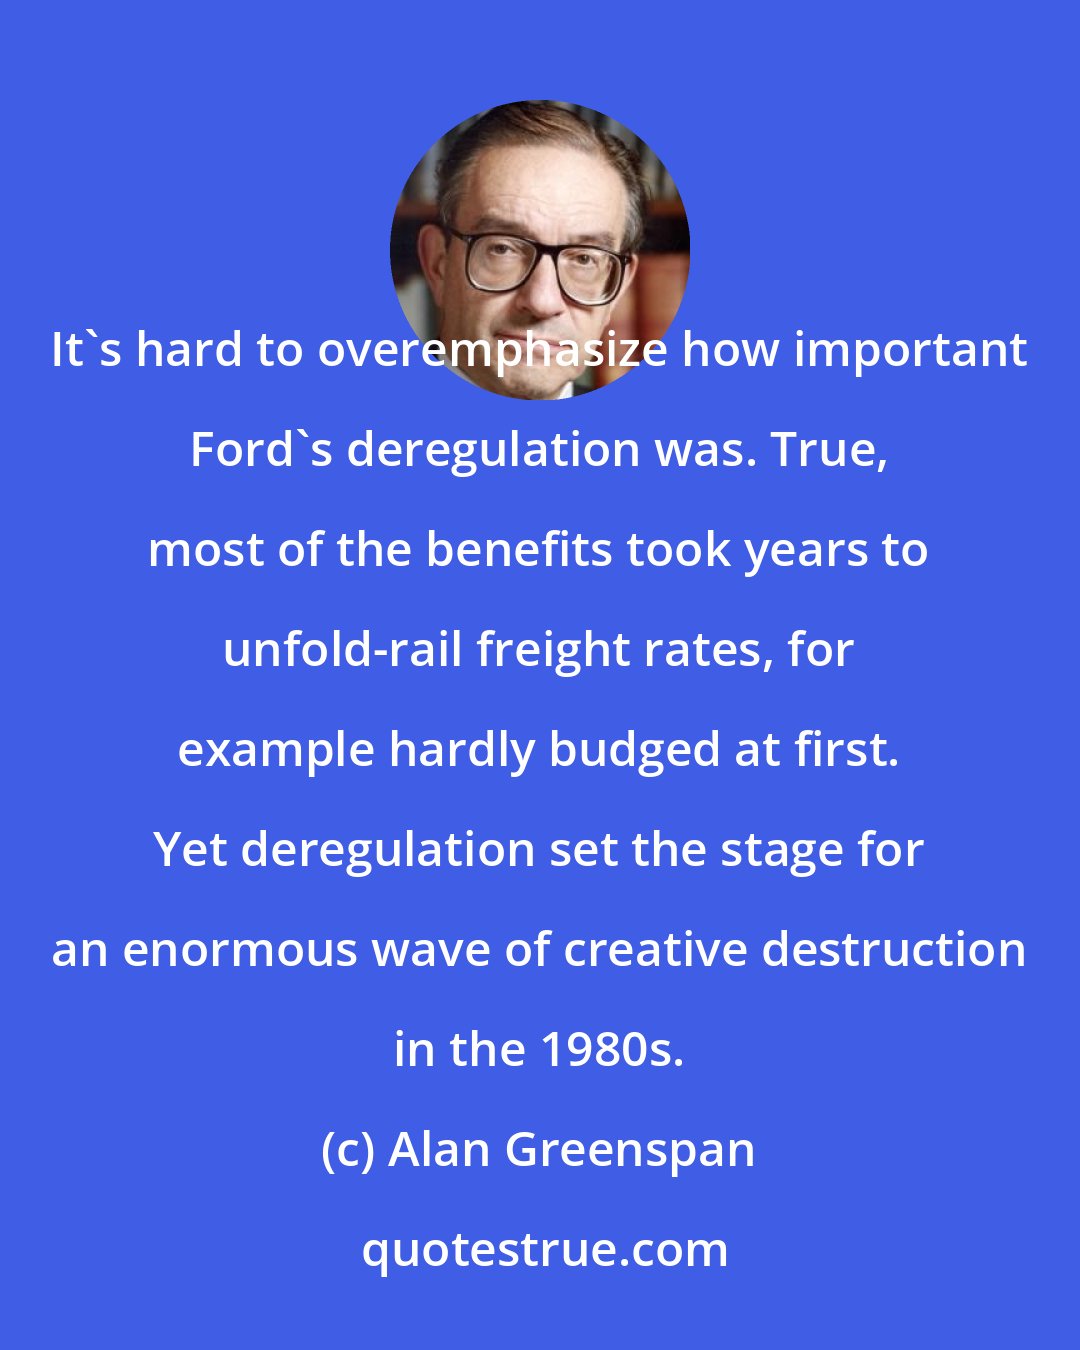 Alan Greenspan: It's hard to overemphasize how important Ford's deregulation was. True, most of the benefits took years to unfold-rail freight rates, for example hardly budged at first. Yet deregulation set the stage for an enormous wave of creative destruction in the 1980s.